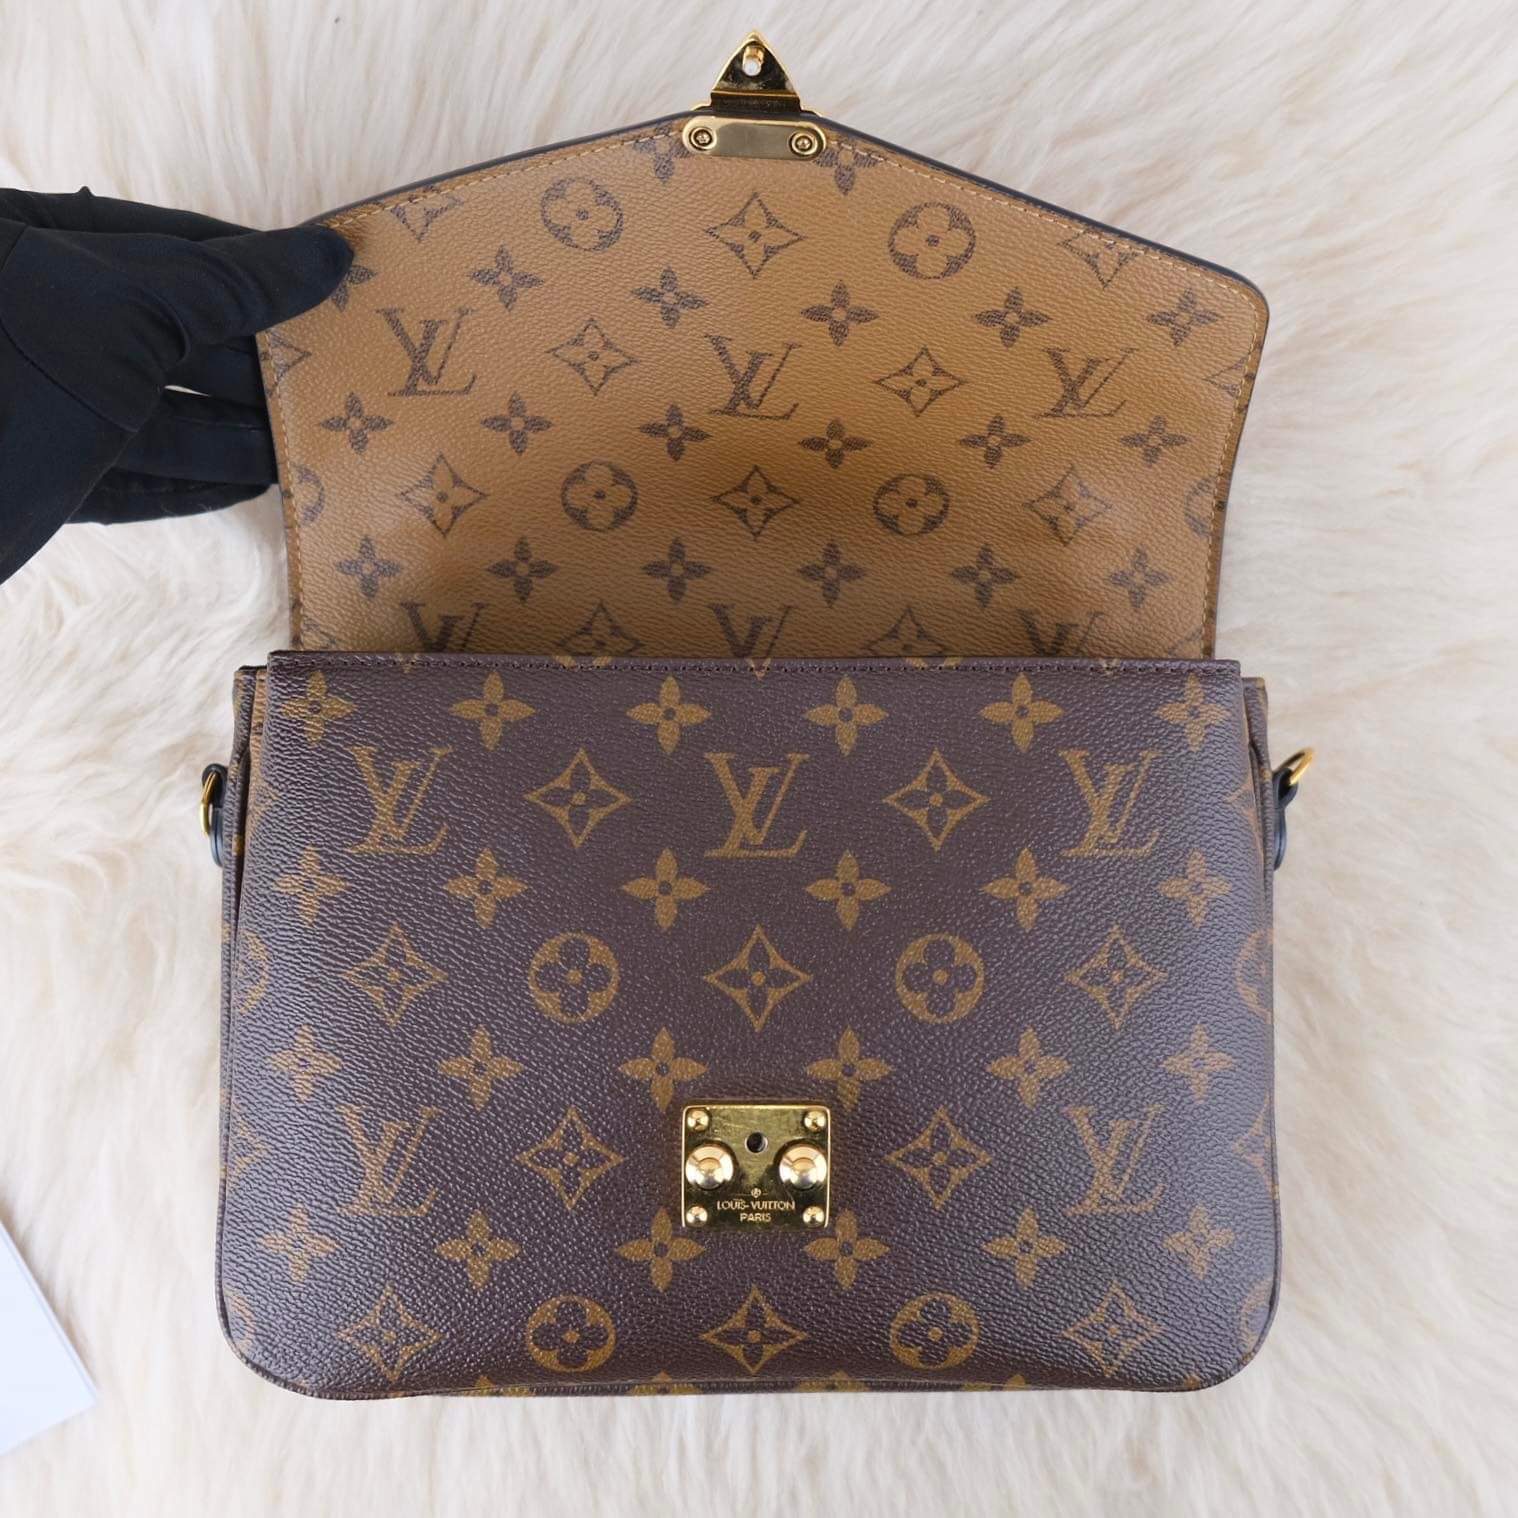 Double Unboxing of the Louis Vuitton OnTheGo GM and Speedy B in Cognac  Leather 